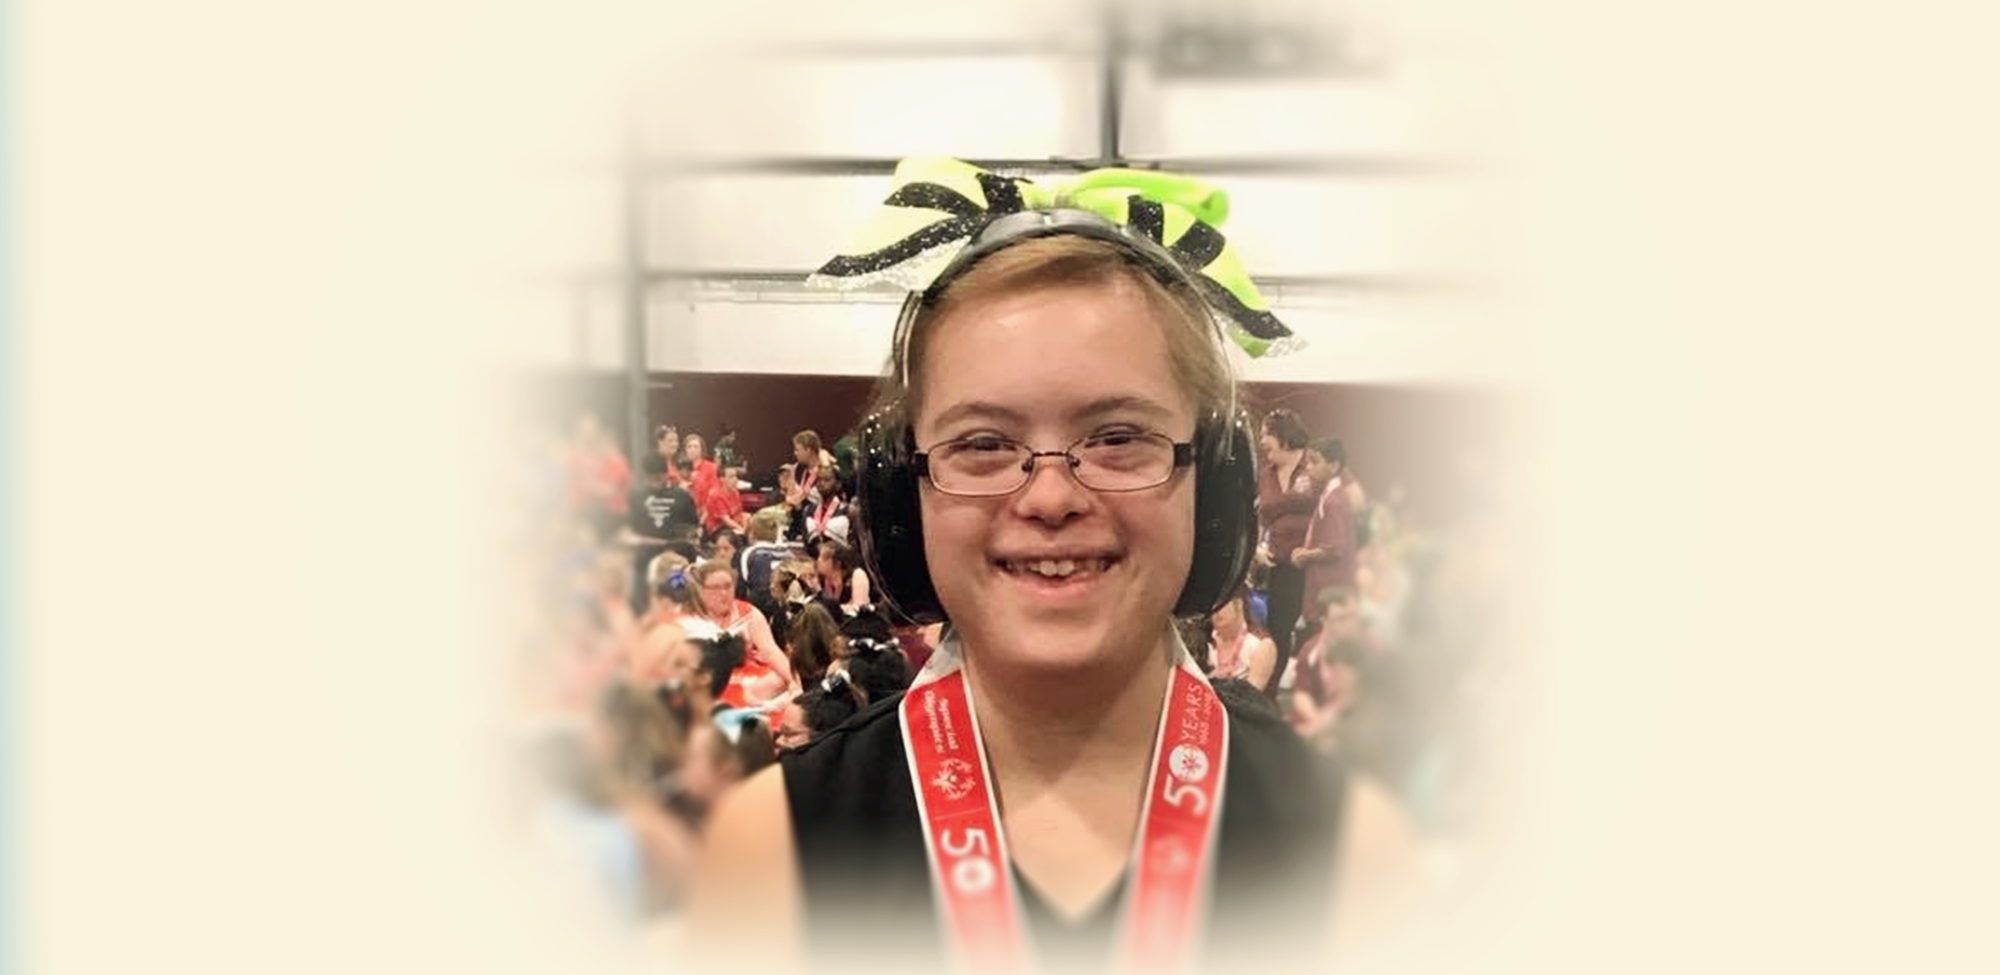 Teen smiling at the camera while wearing headphones